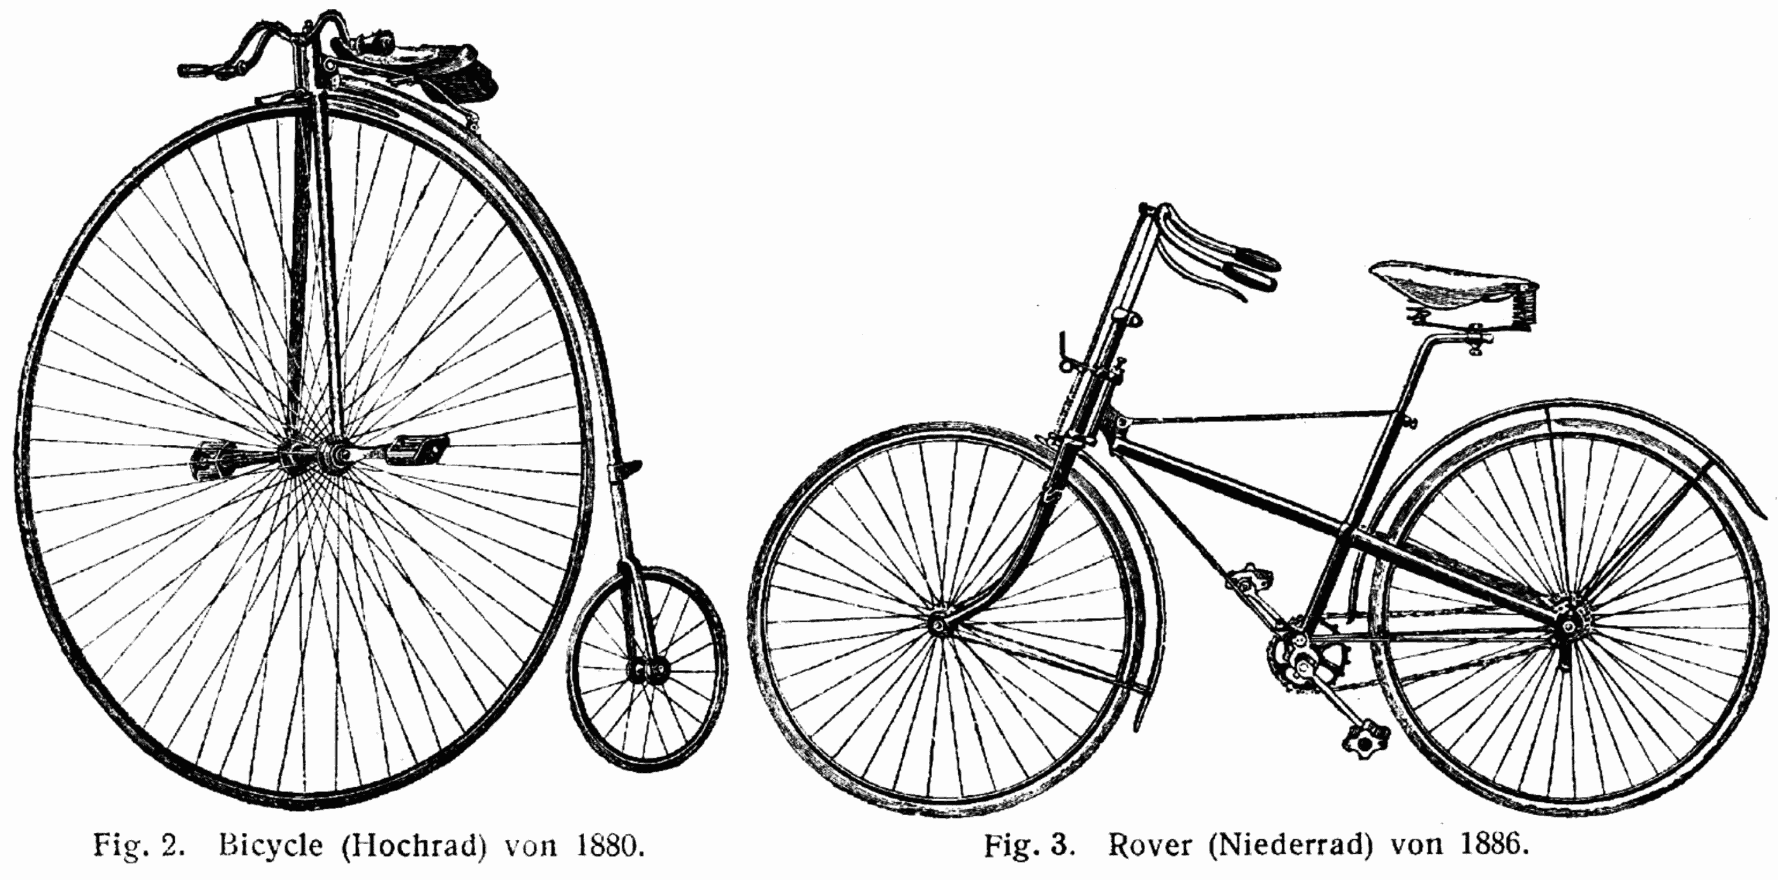 Image from 1904 Dictionary of Technology showing an 1880 bicycle on the left and an 1886 rover on the right. source